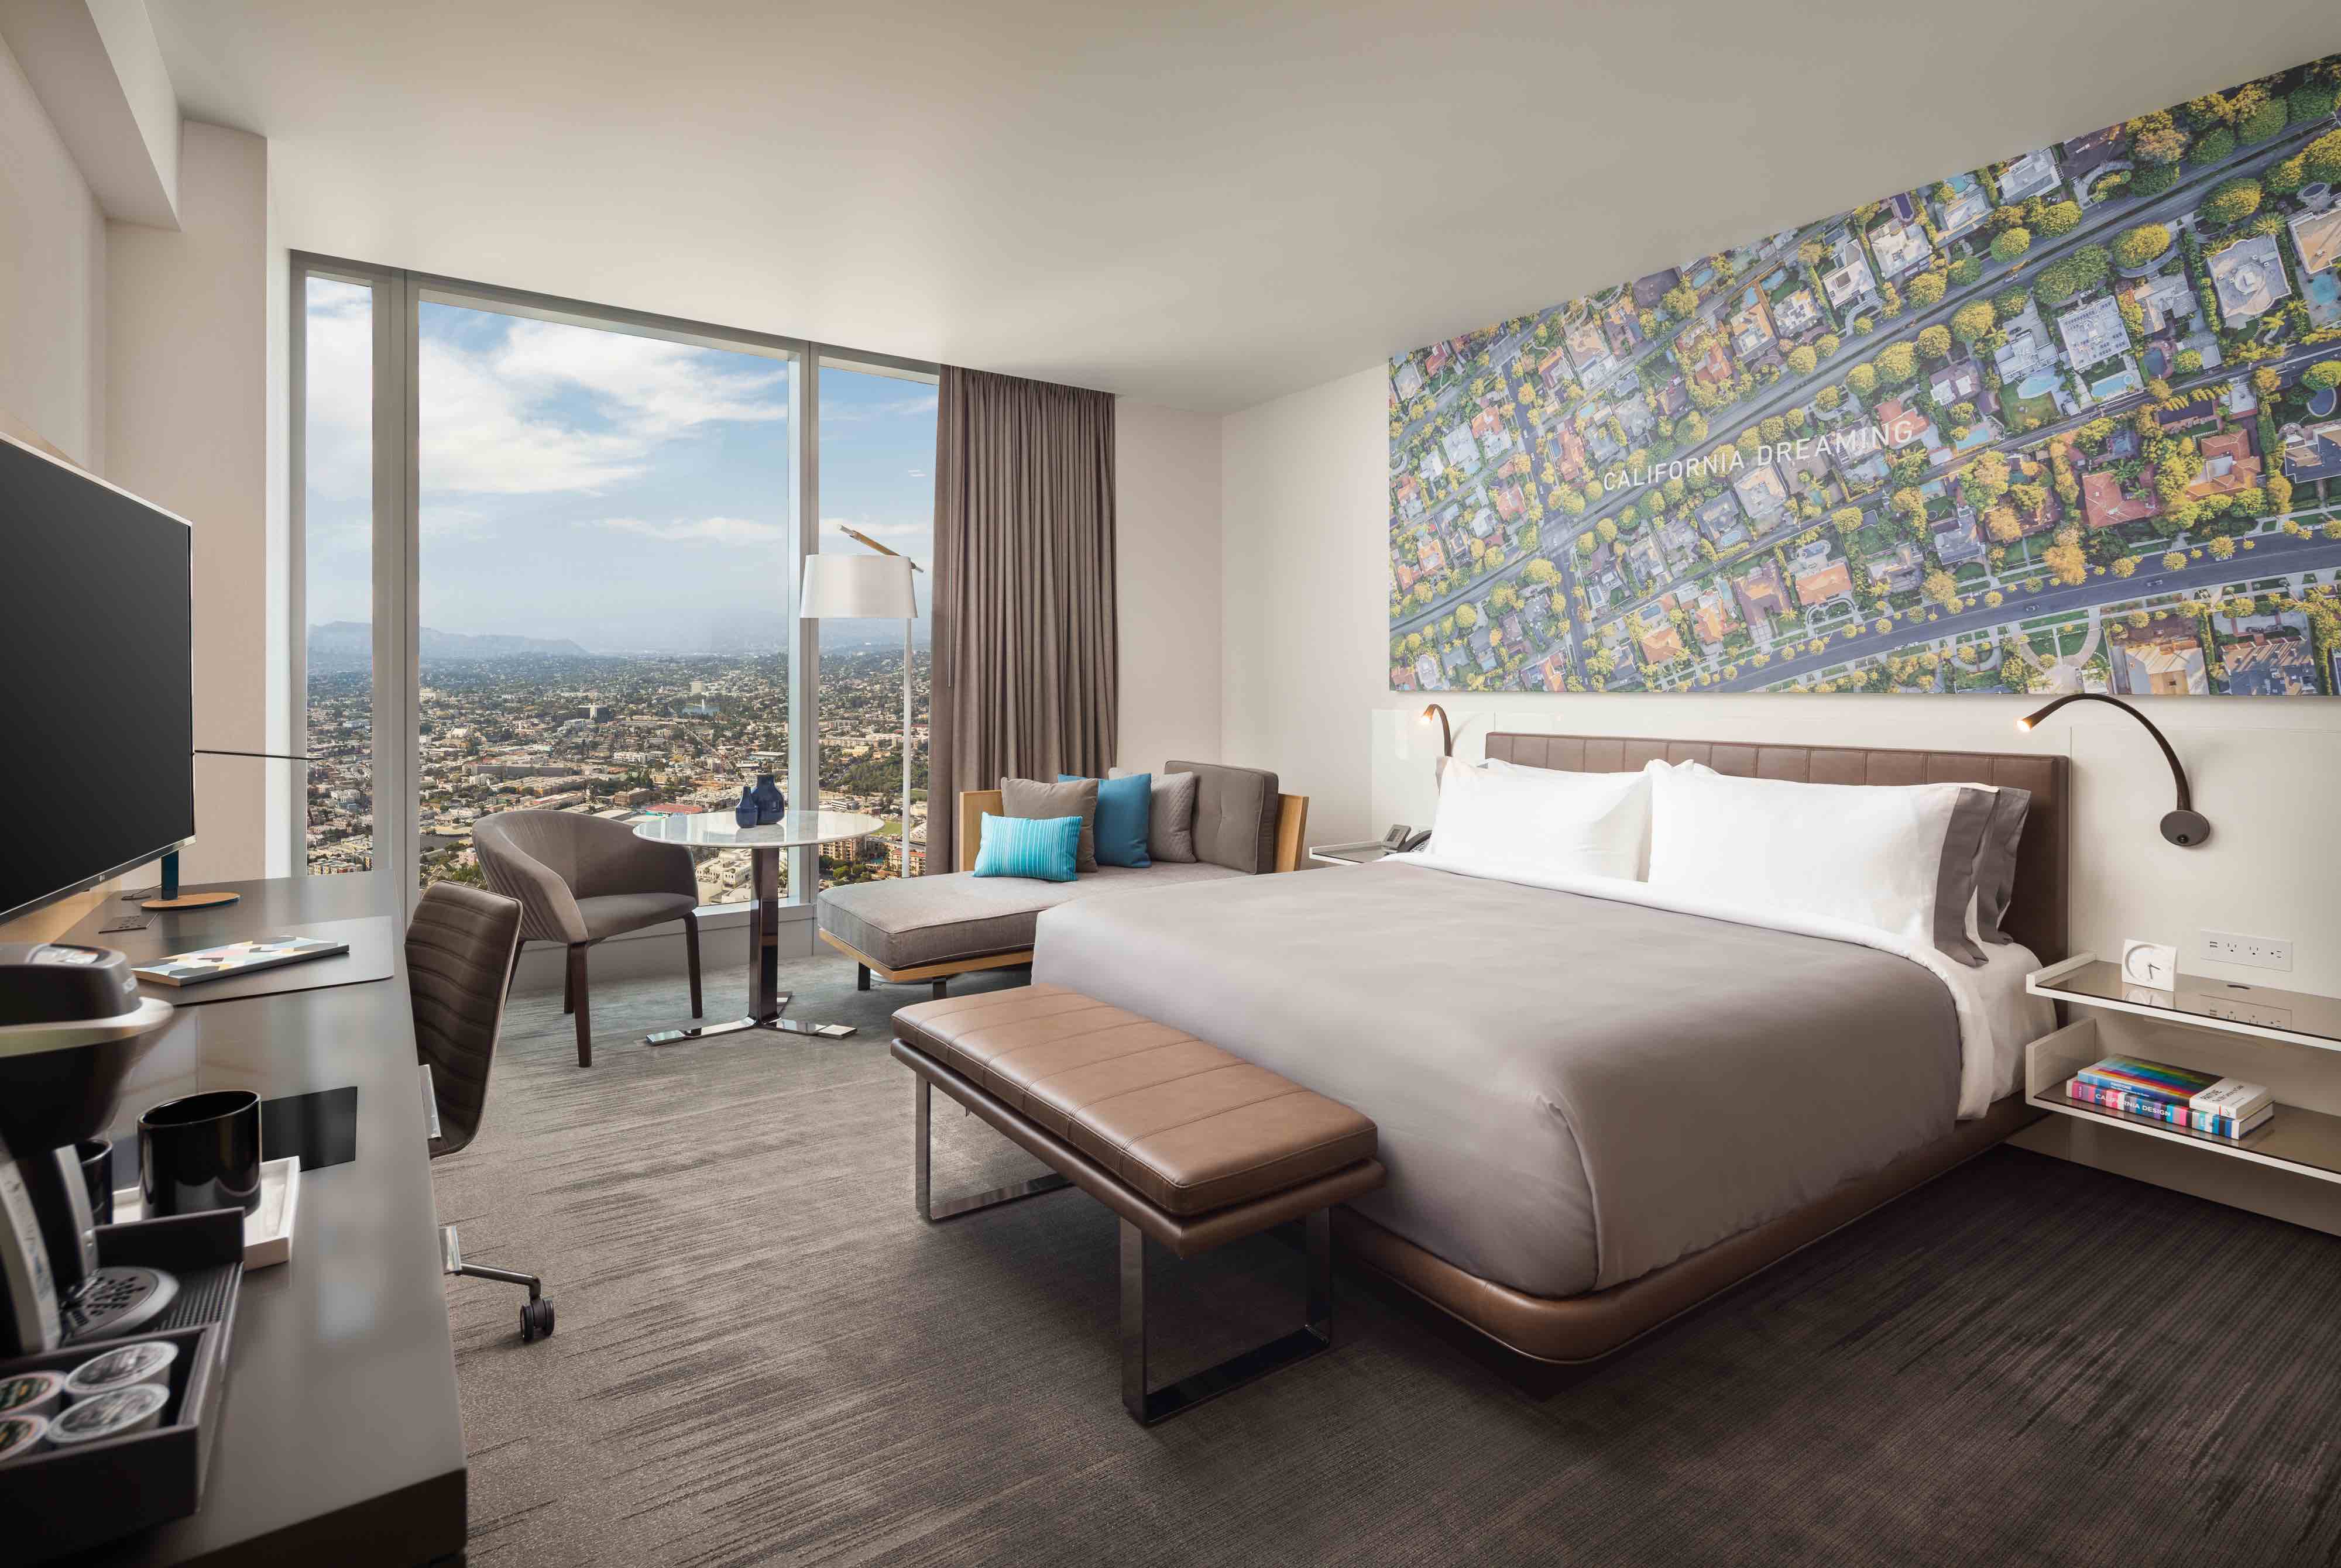 Hotels Los Angeles Hotels Features Review